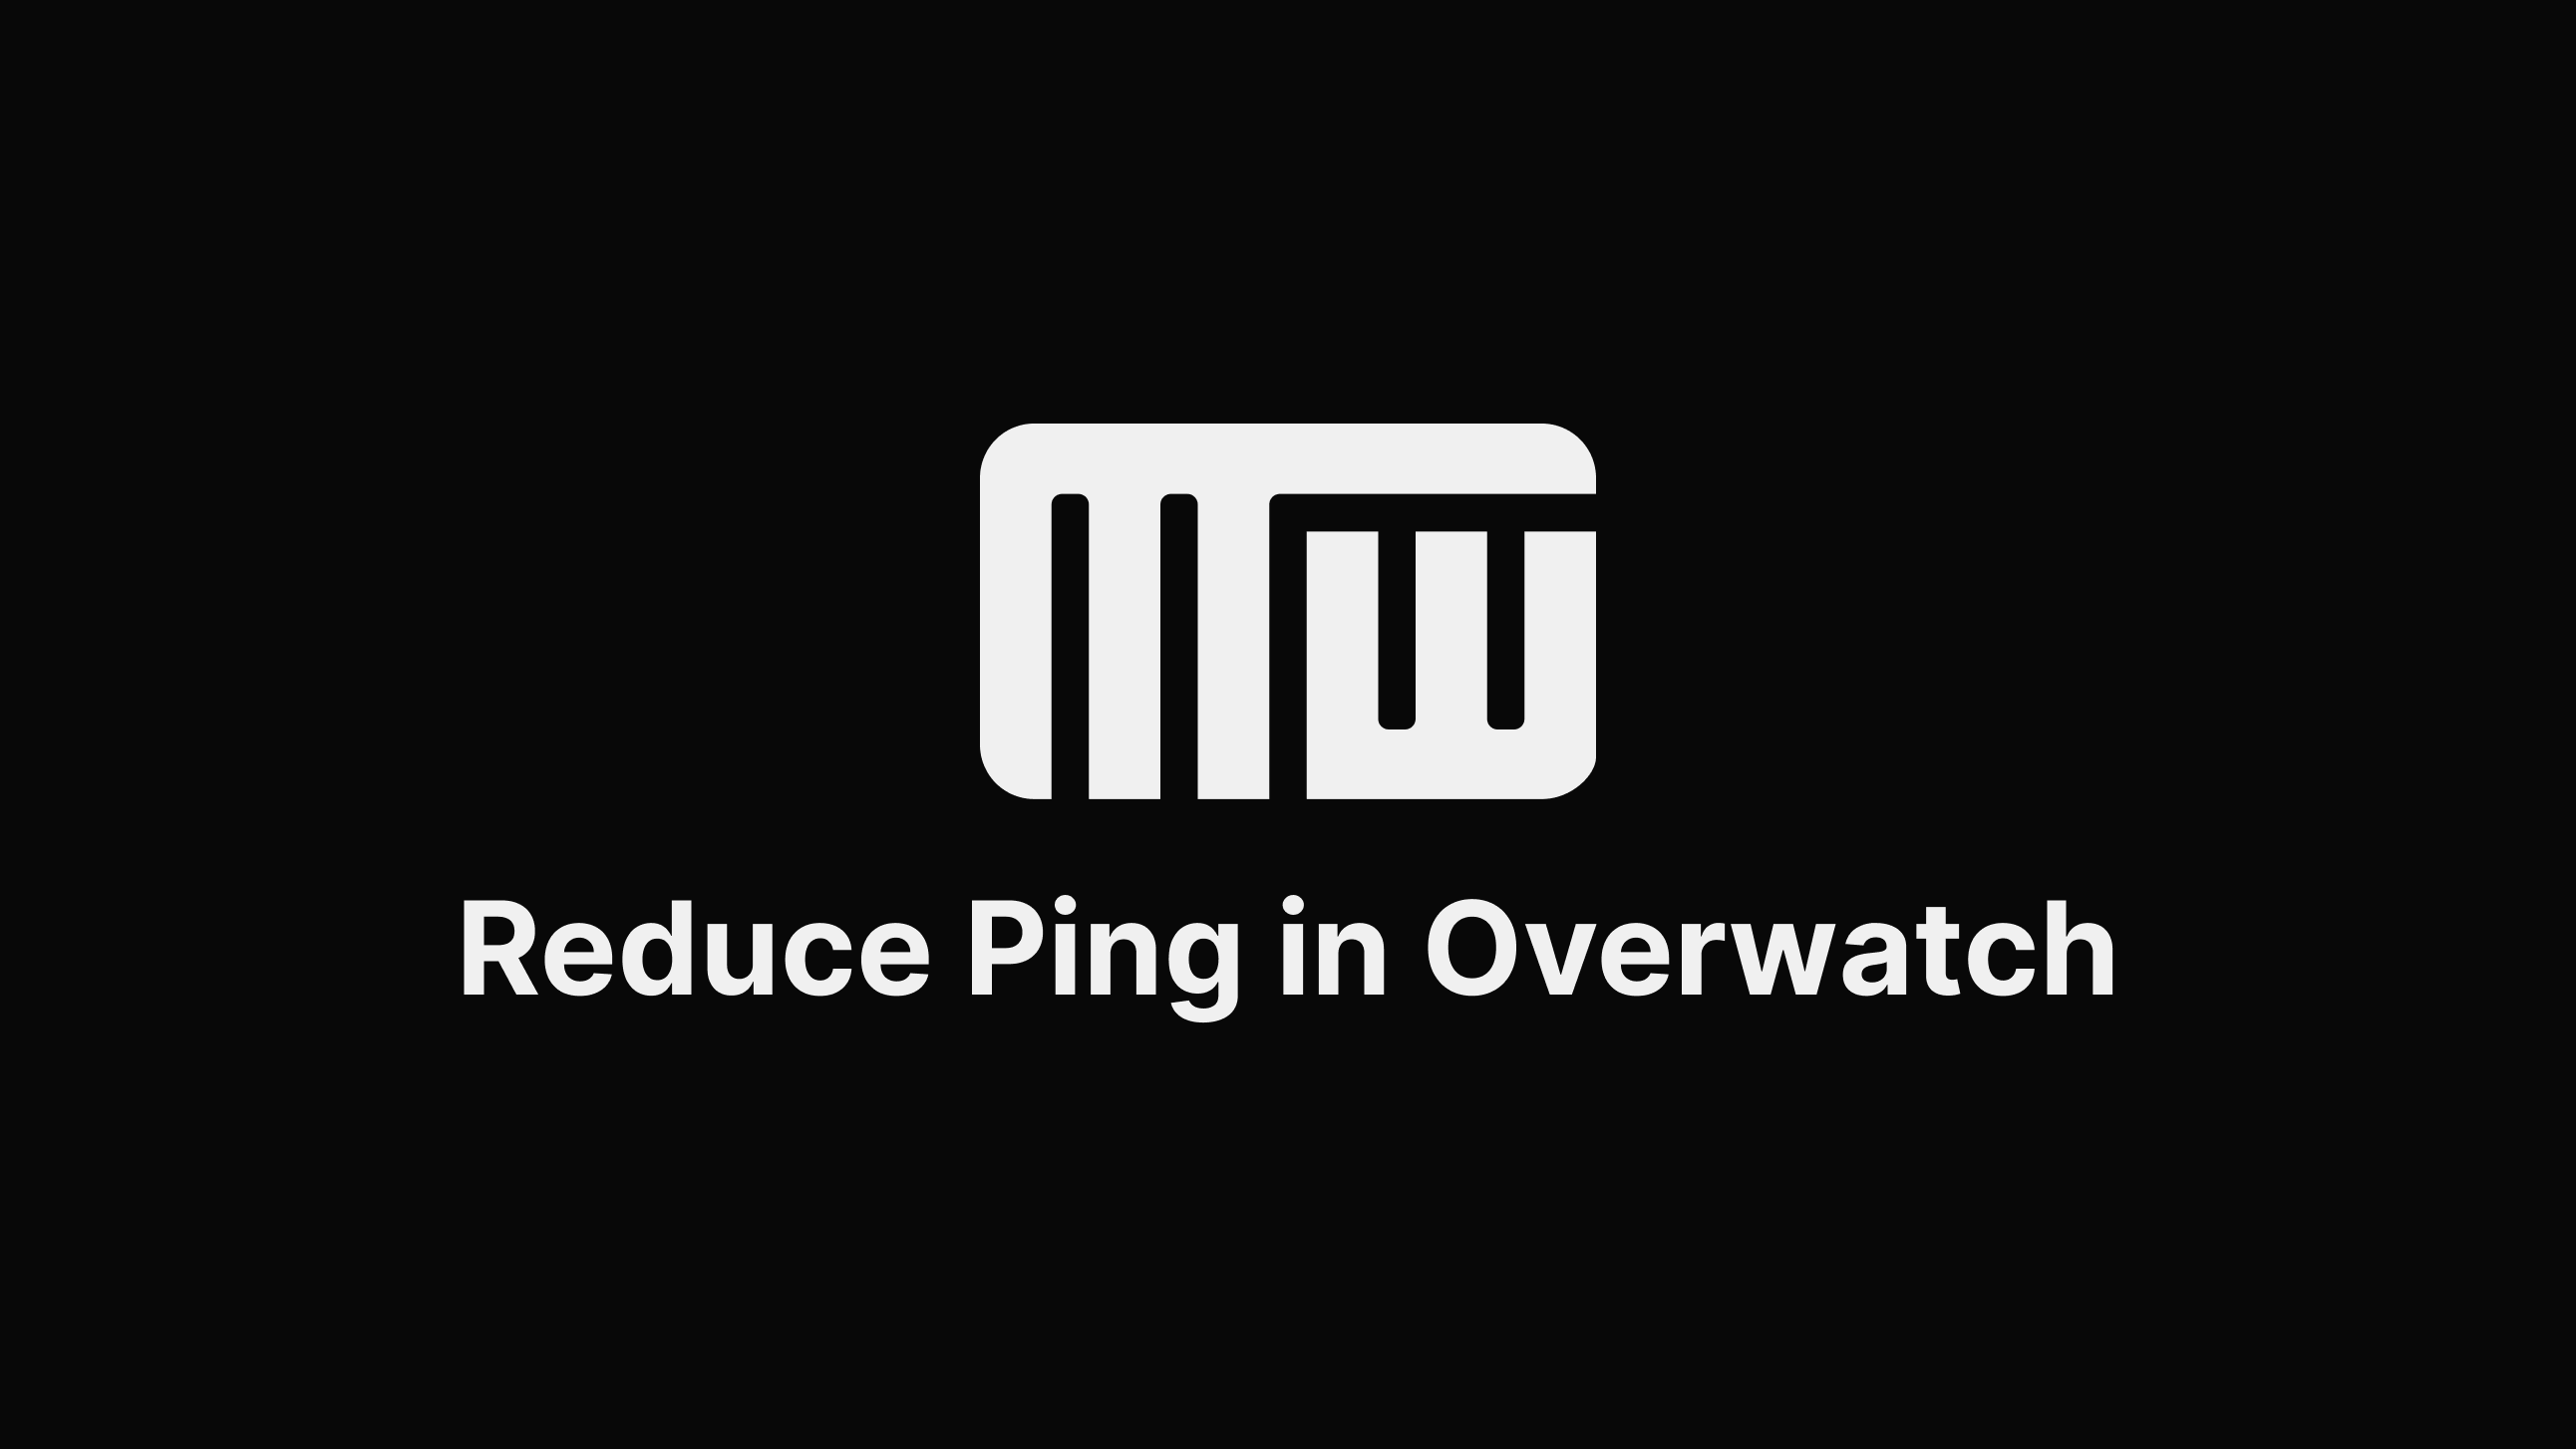 Reduce Ping in Overwatch